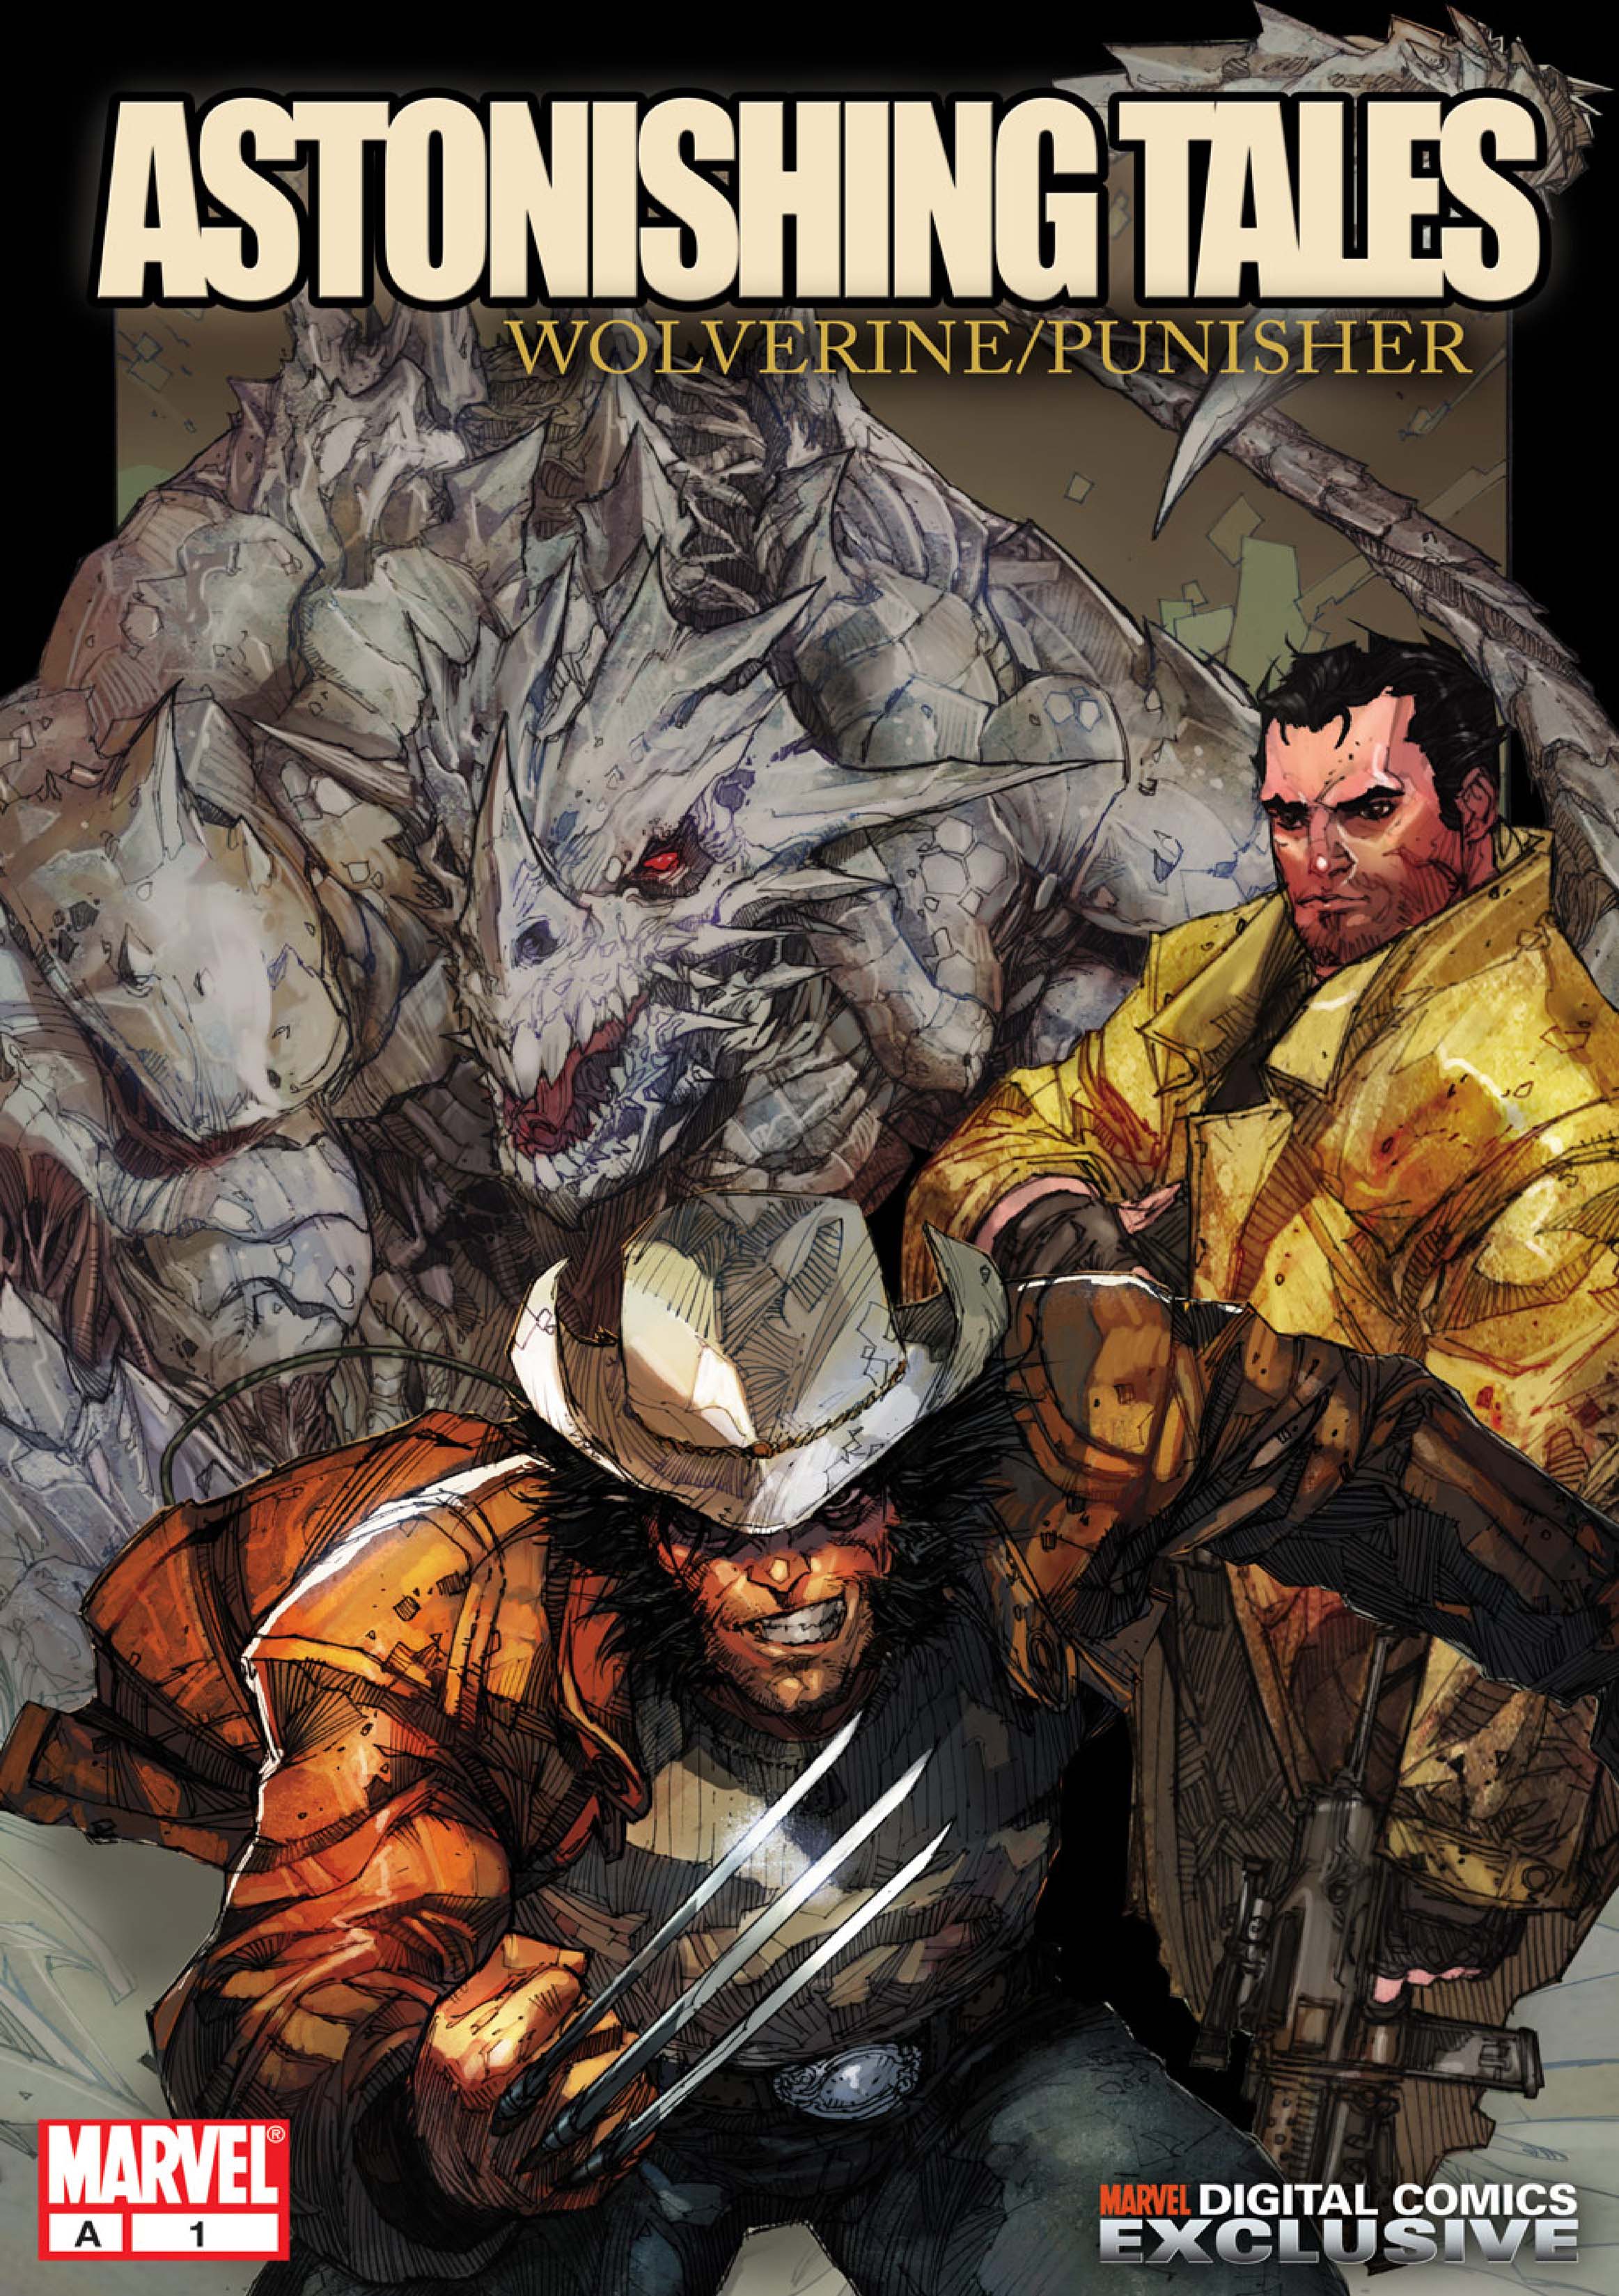 Read online Astonishing Tales: Wolverine/Punisher comic -  Issue #1 - 1